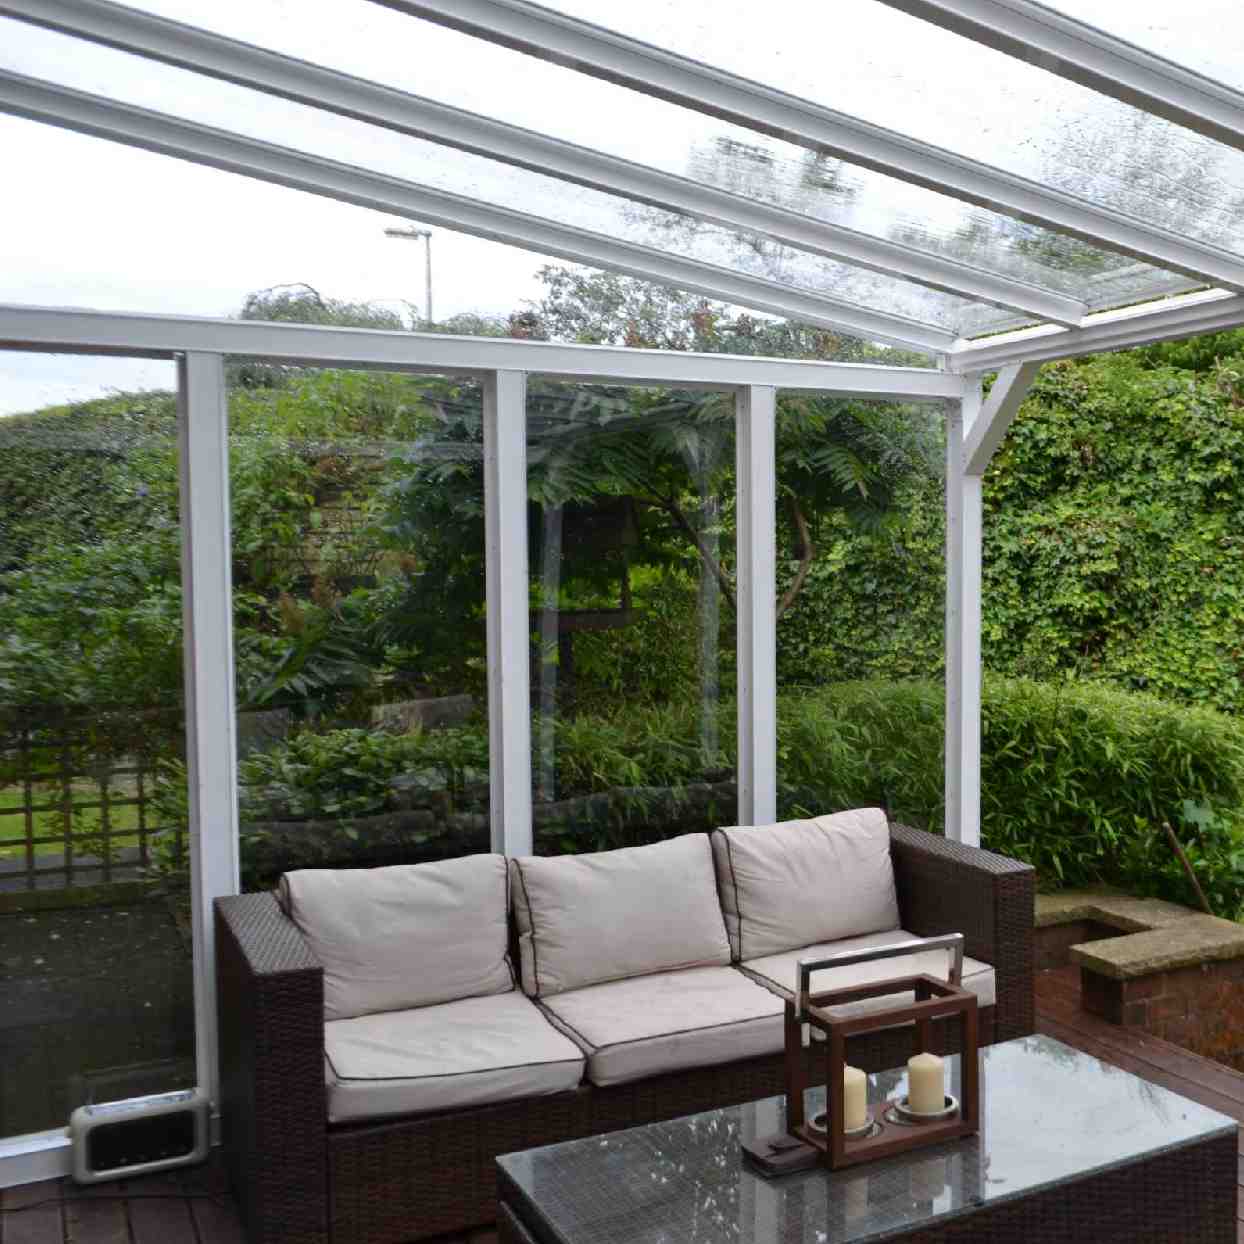 Buy Omega Verandah White with 6mm Glass Clear Plate Polycarbonate Glazing - 7.7m (W) x 3.0m (P), (4) Supporting Posts online today